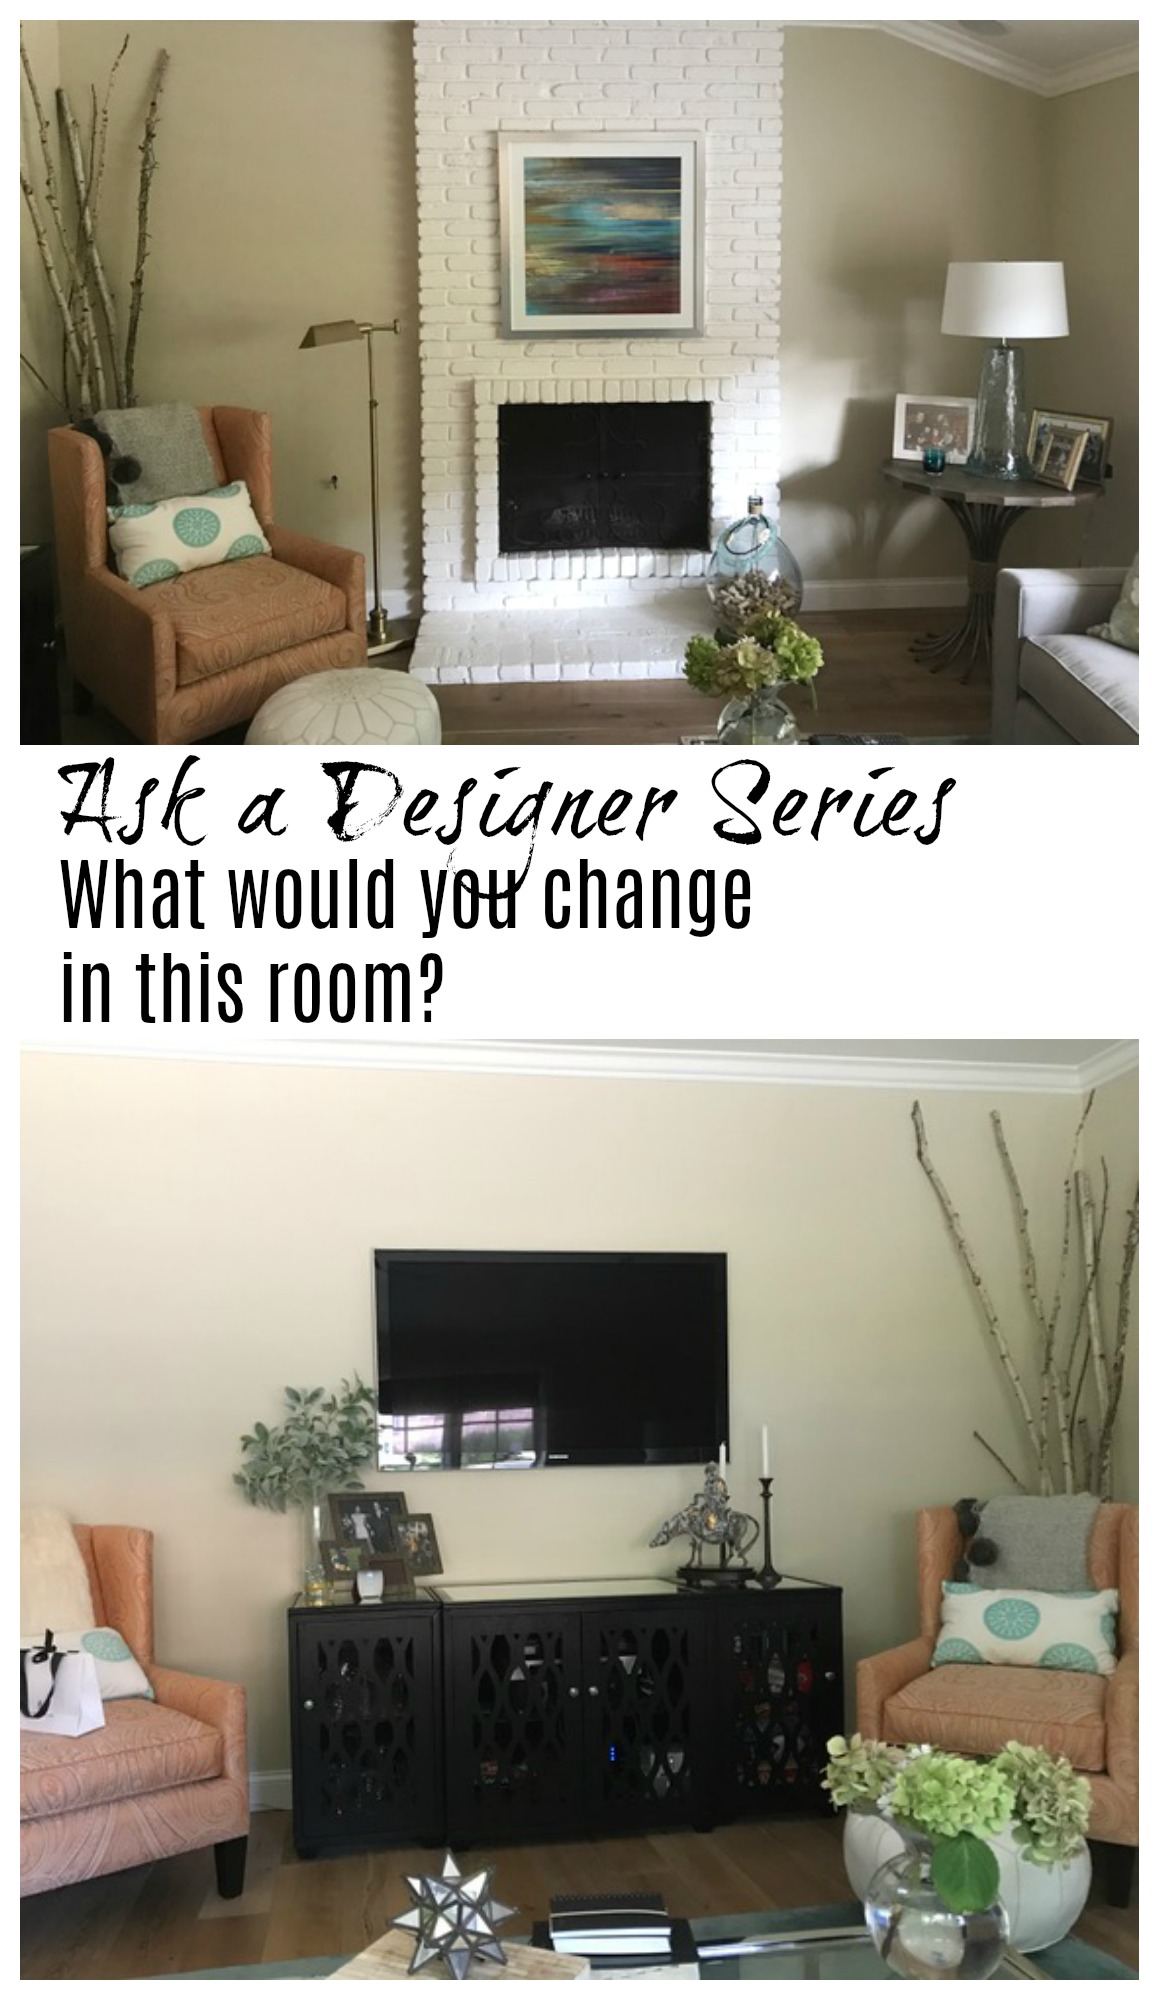 Ask a Desinger Series- See what a Designer Suggested!